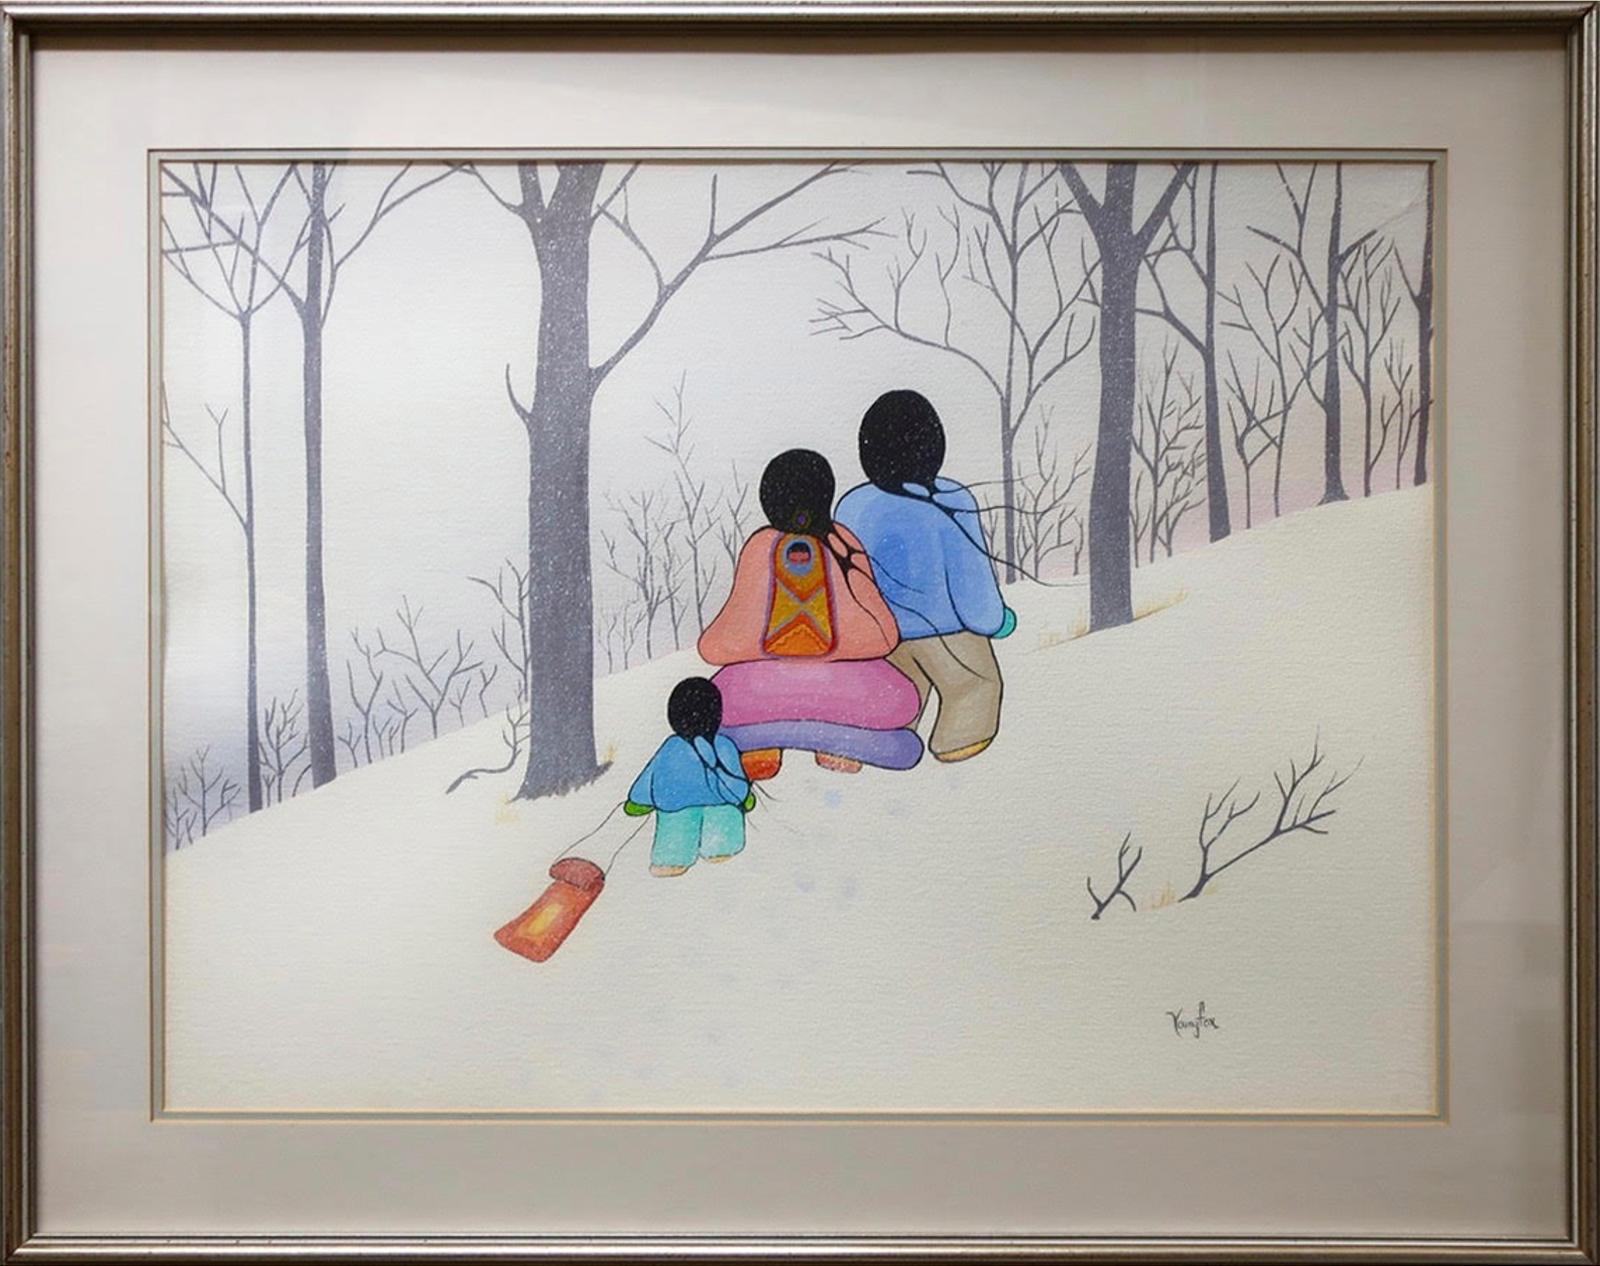 Cecil Robert Youngfox (1942-1987) - Untitled (Couple With Children In A Winter Landscape)